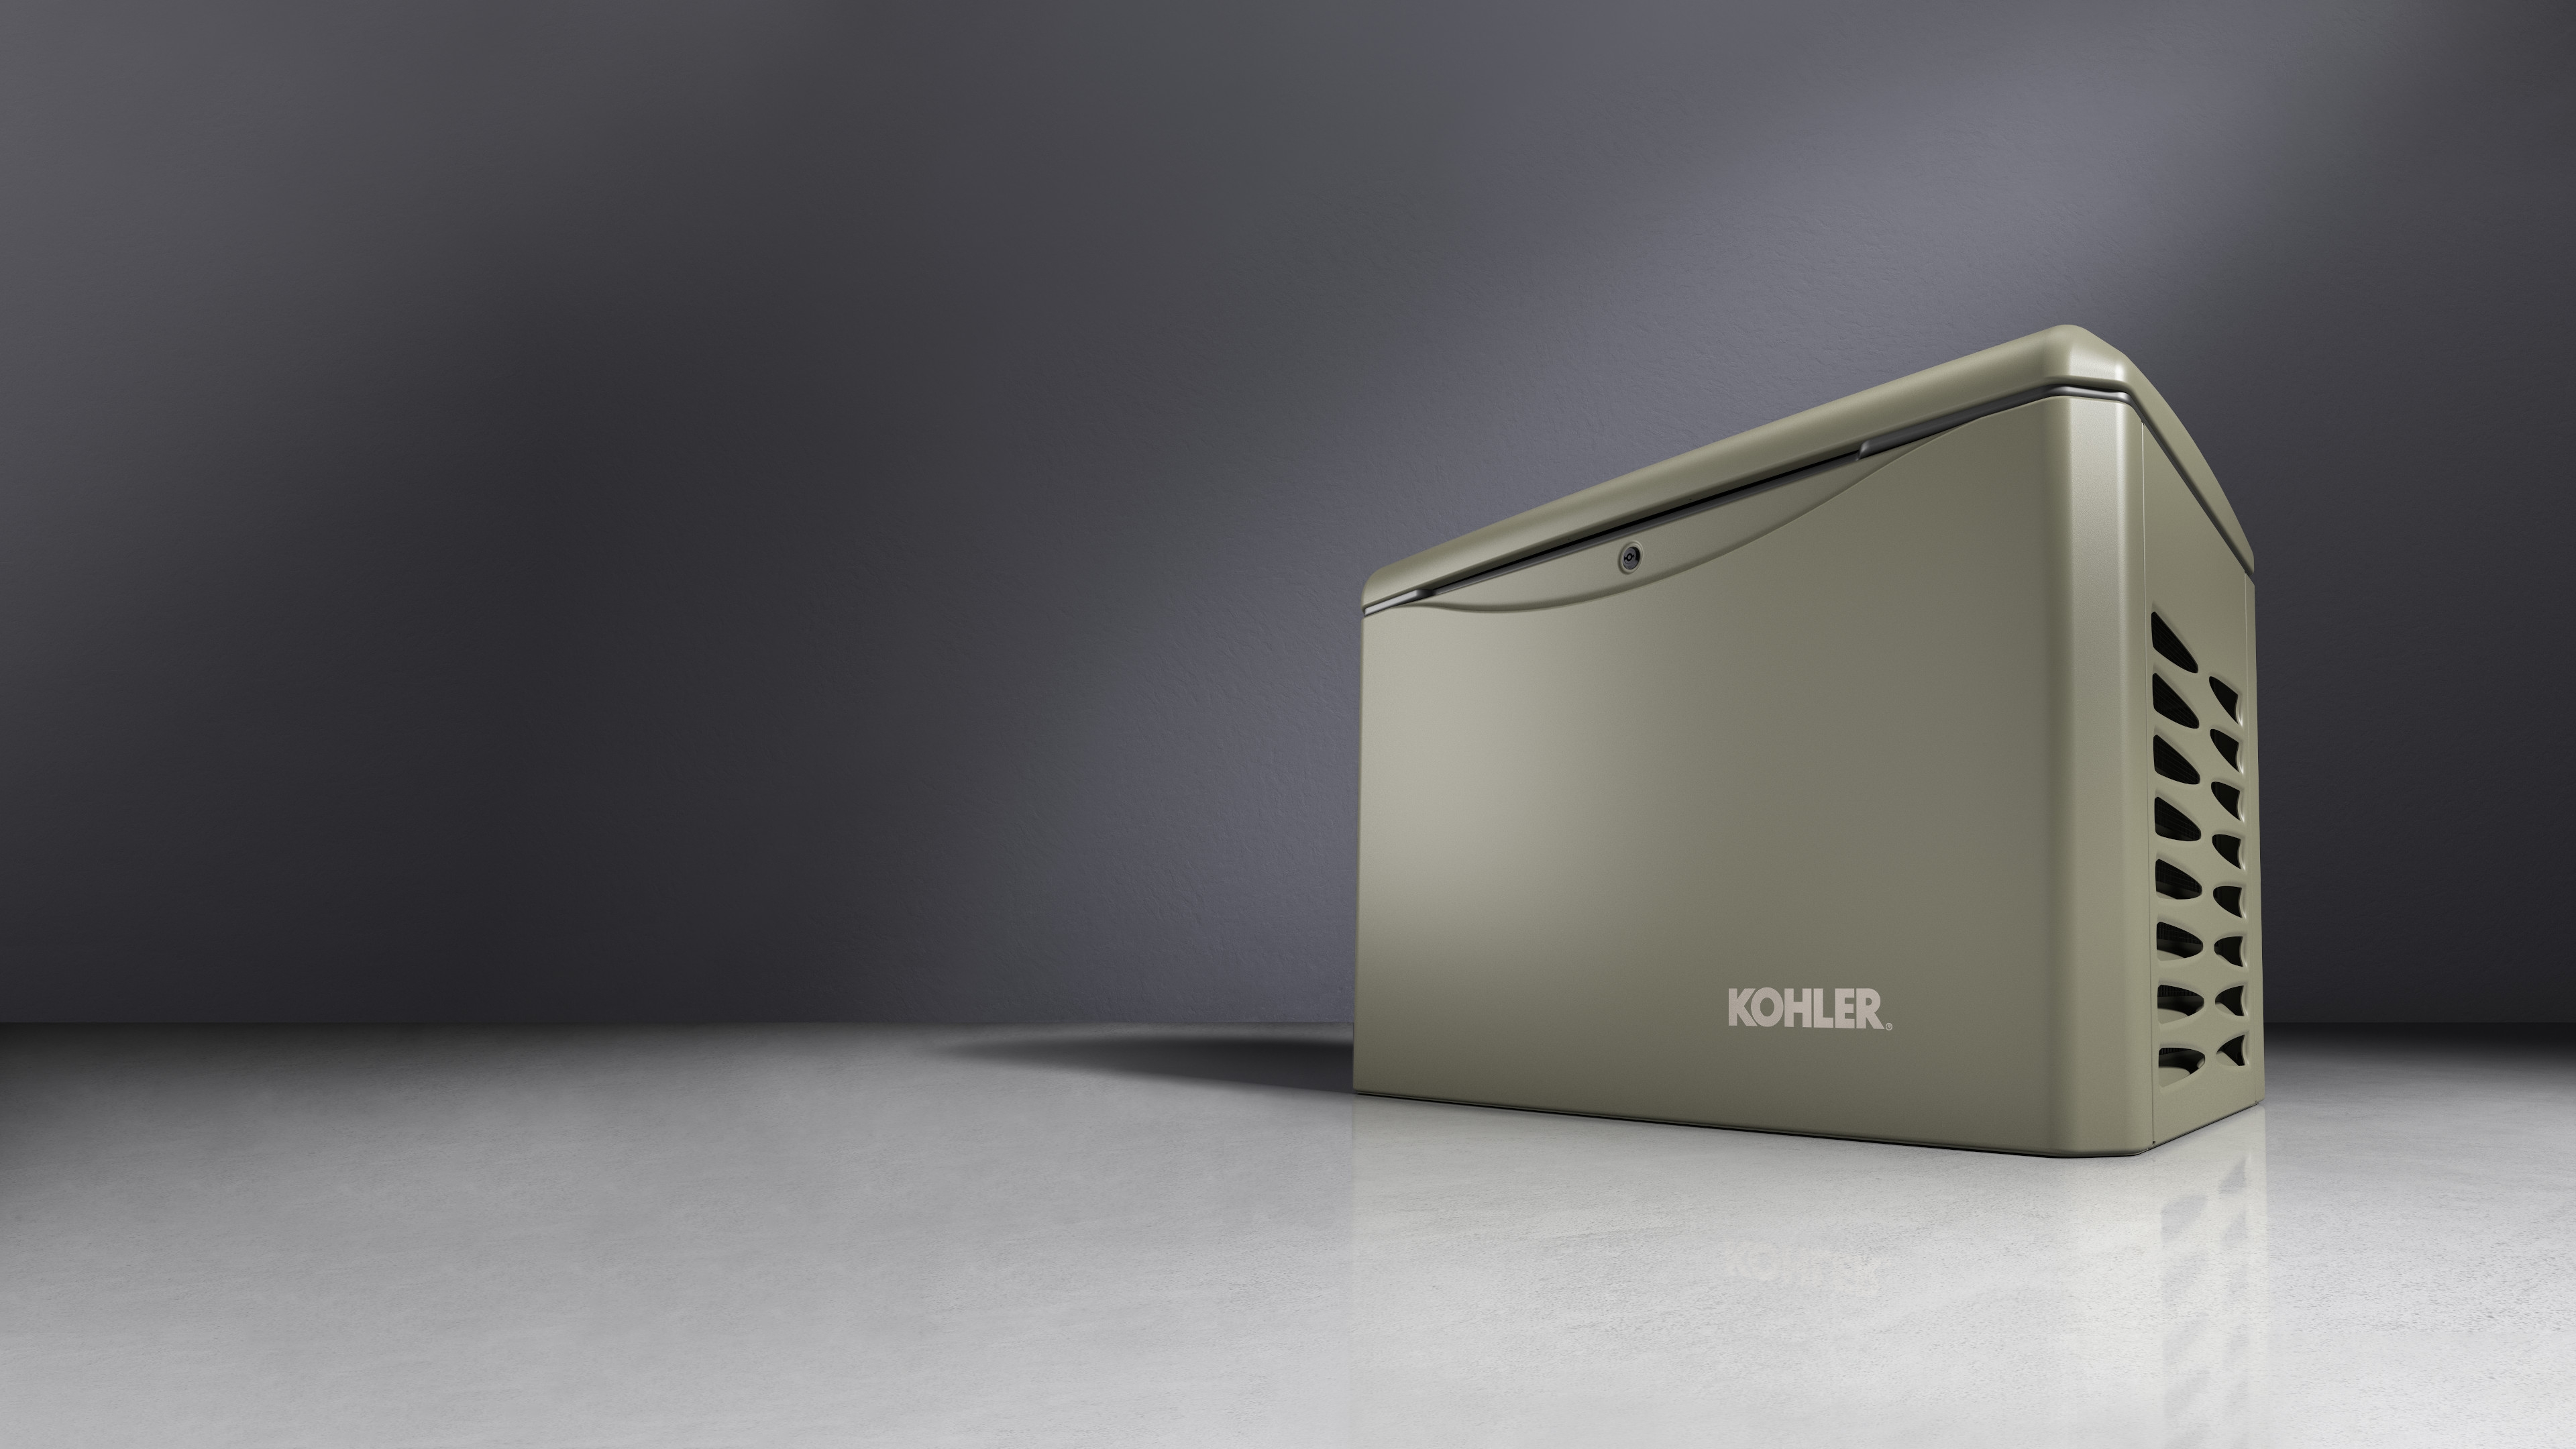 Nevergreen color Kohler residential generator with ventilated side panels, showcased against a gradient gray background.